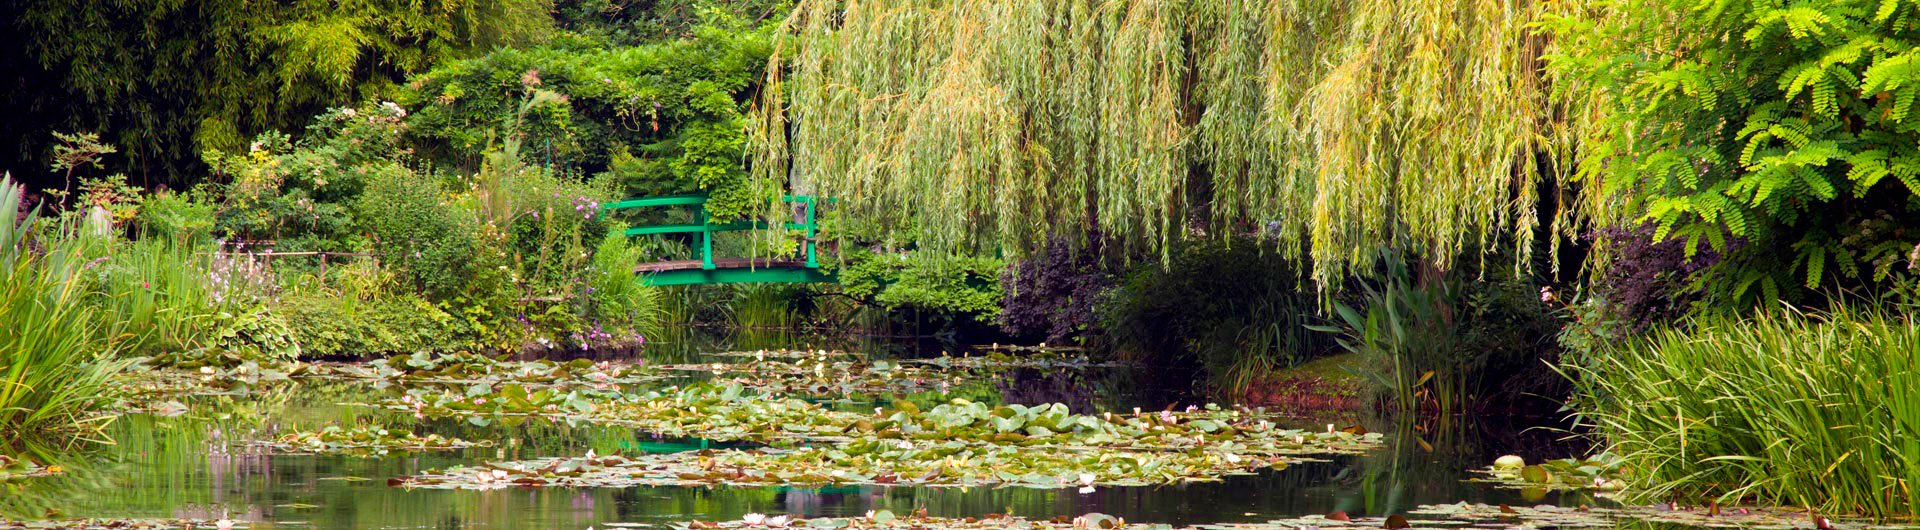 Guided tour of Giverny